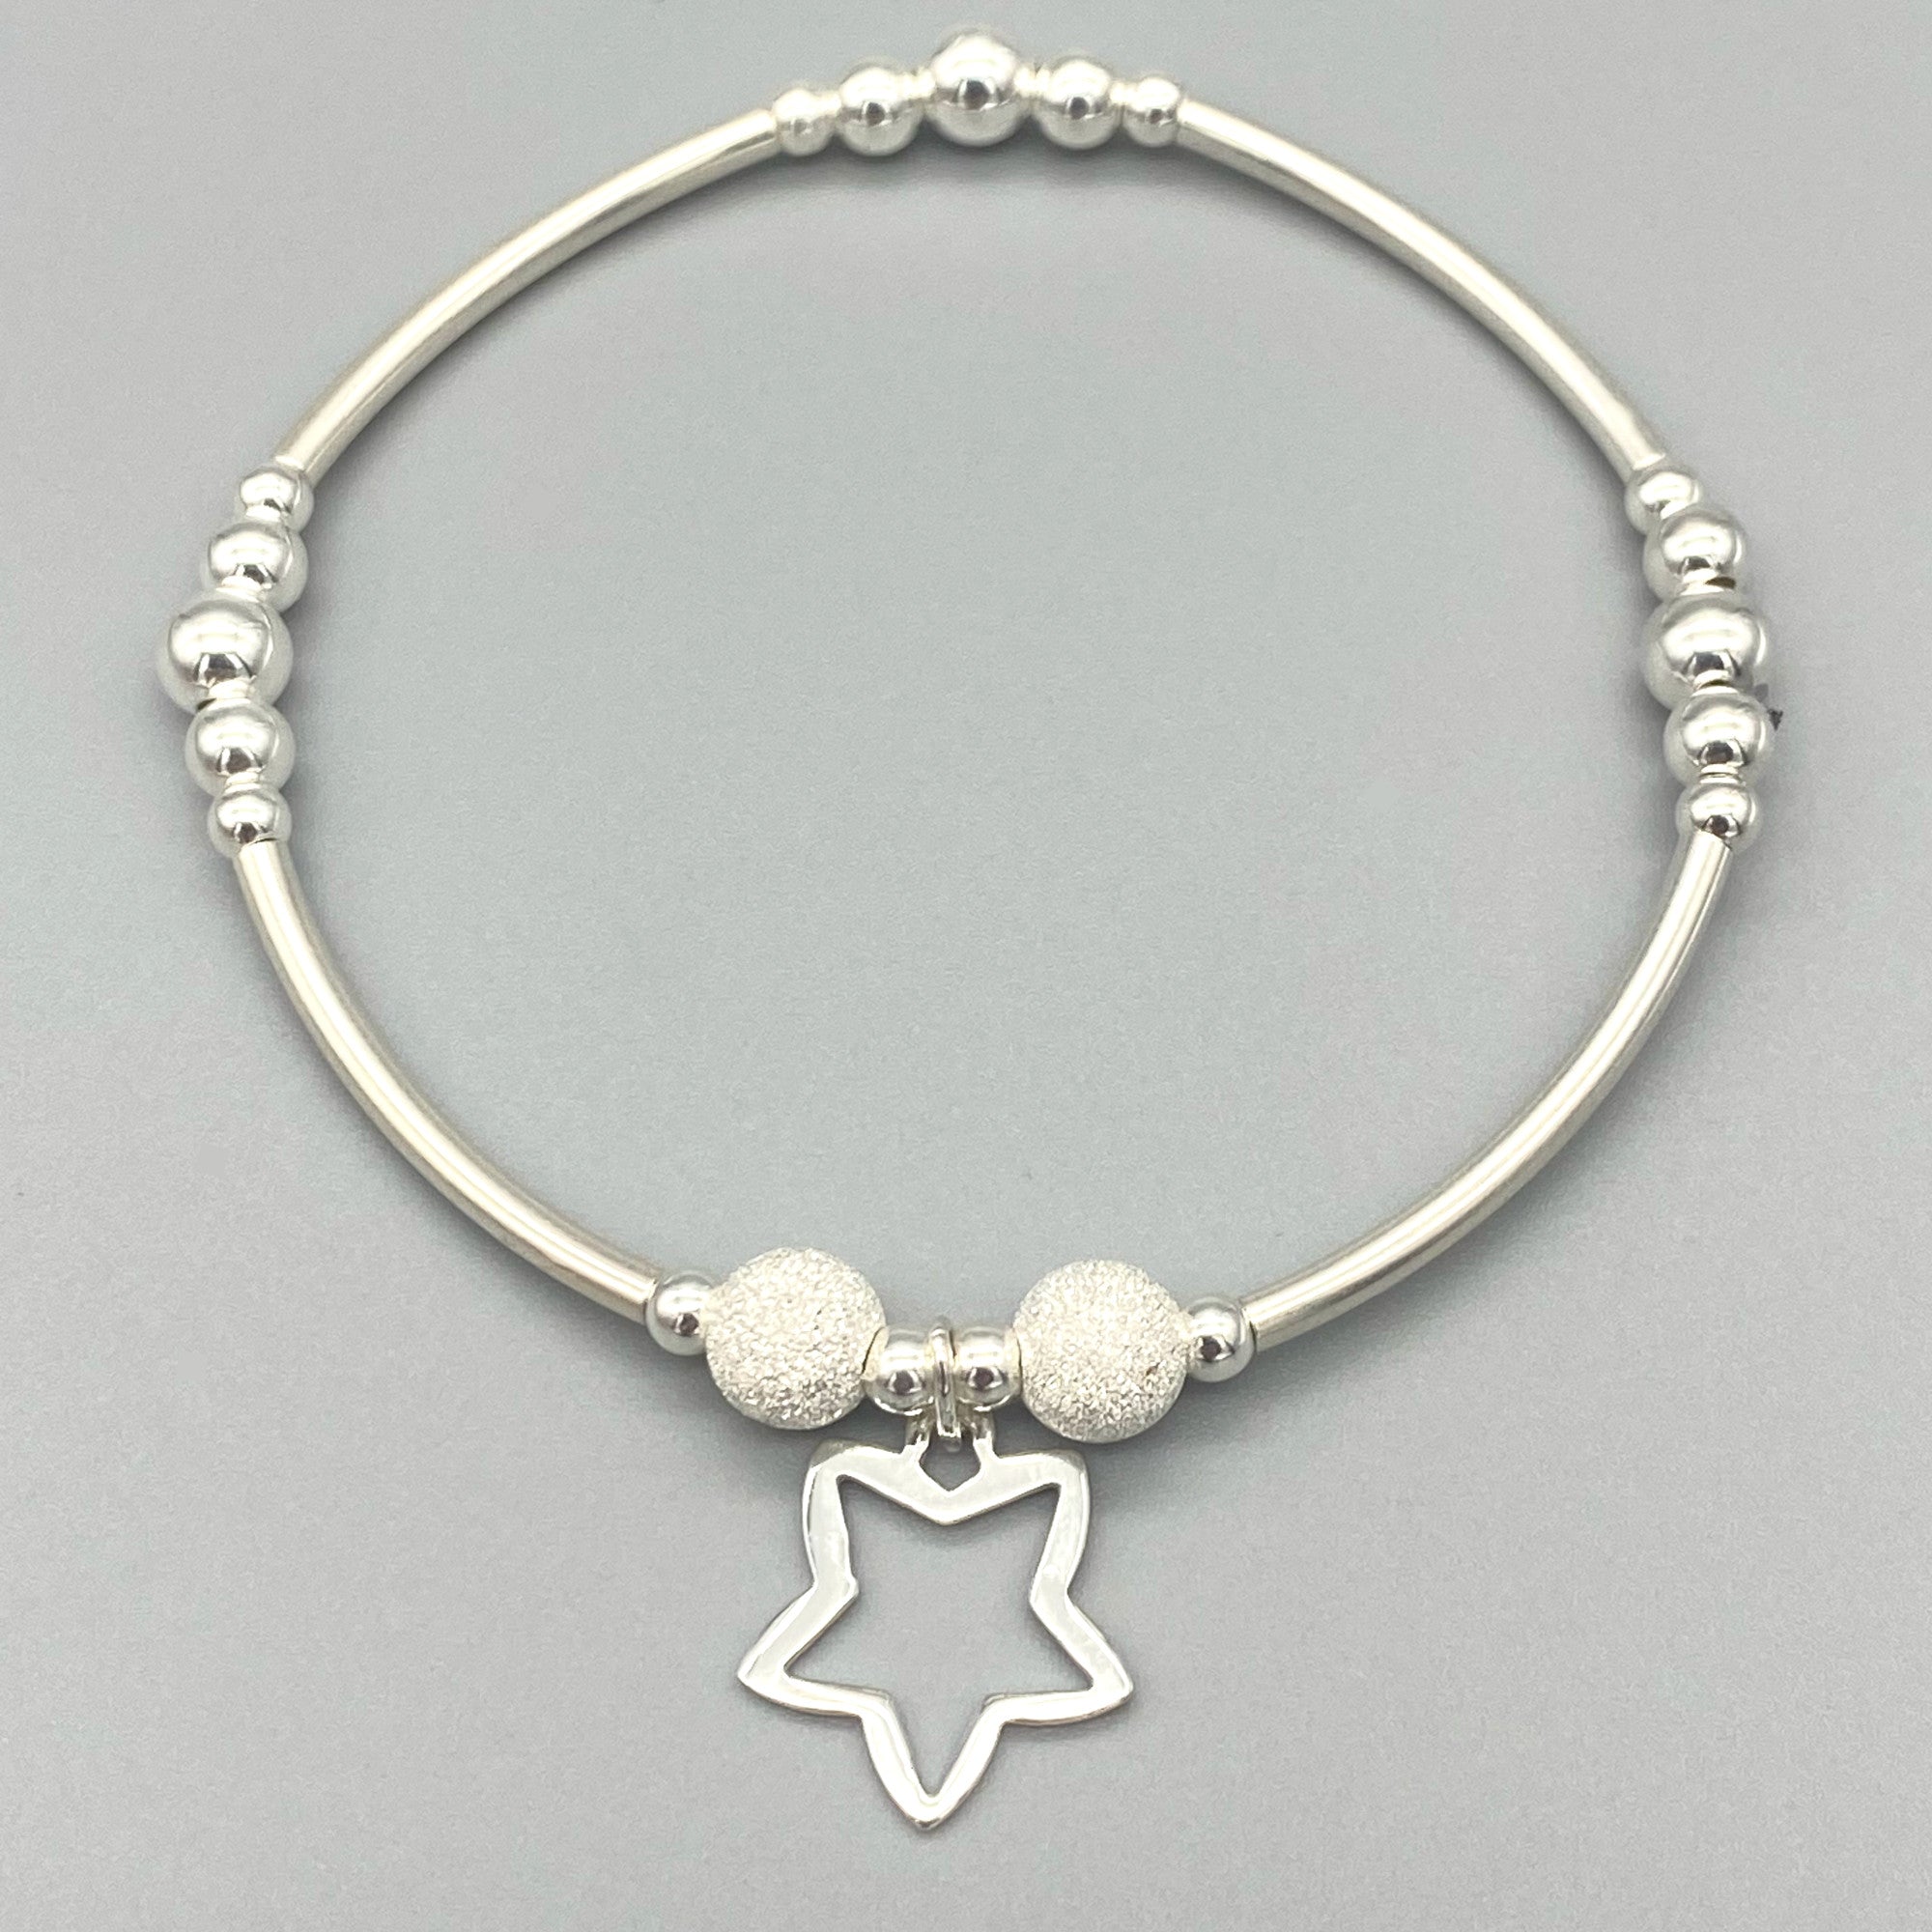 Child's Silver Bracelet 'Wish Upon A Star' - Sterling Silver